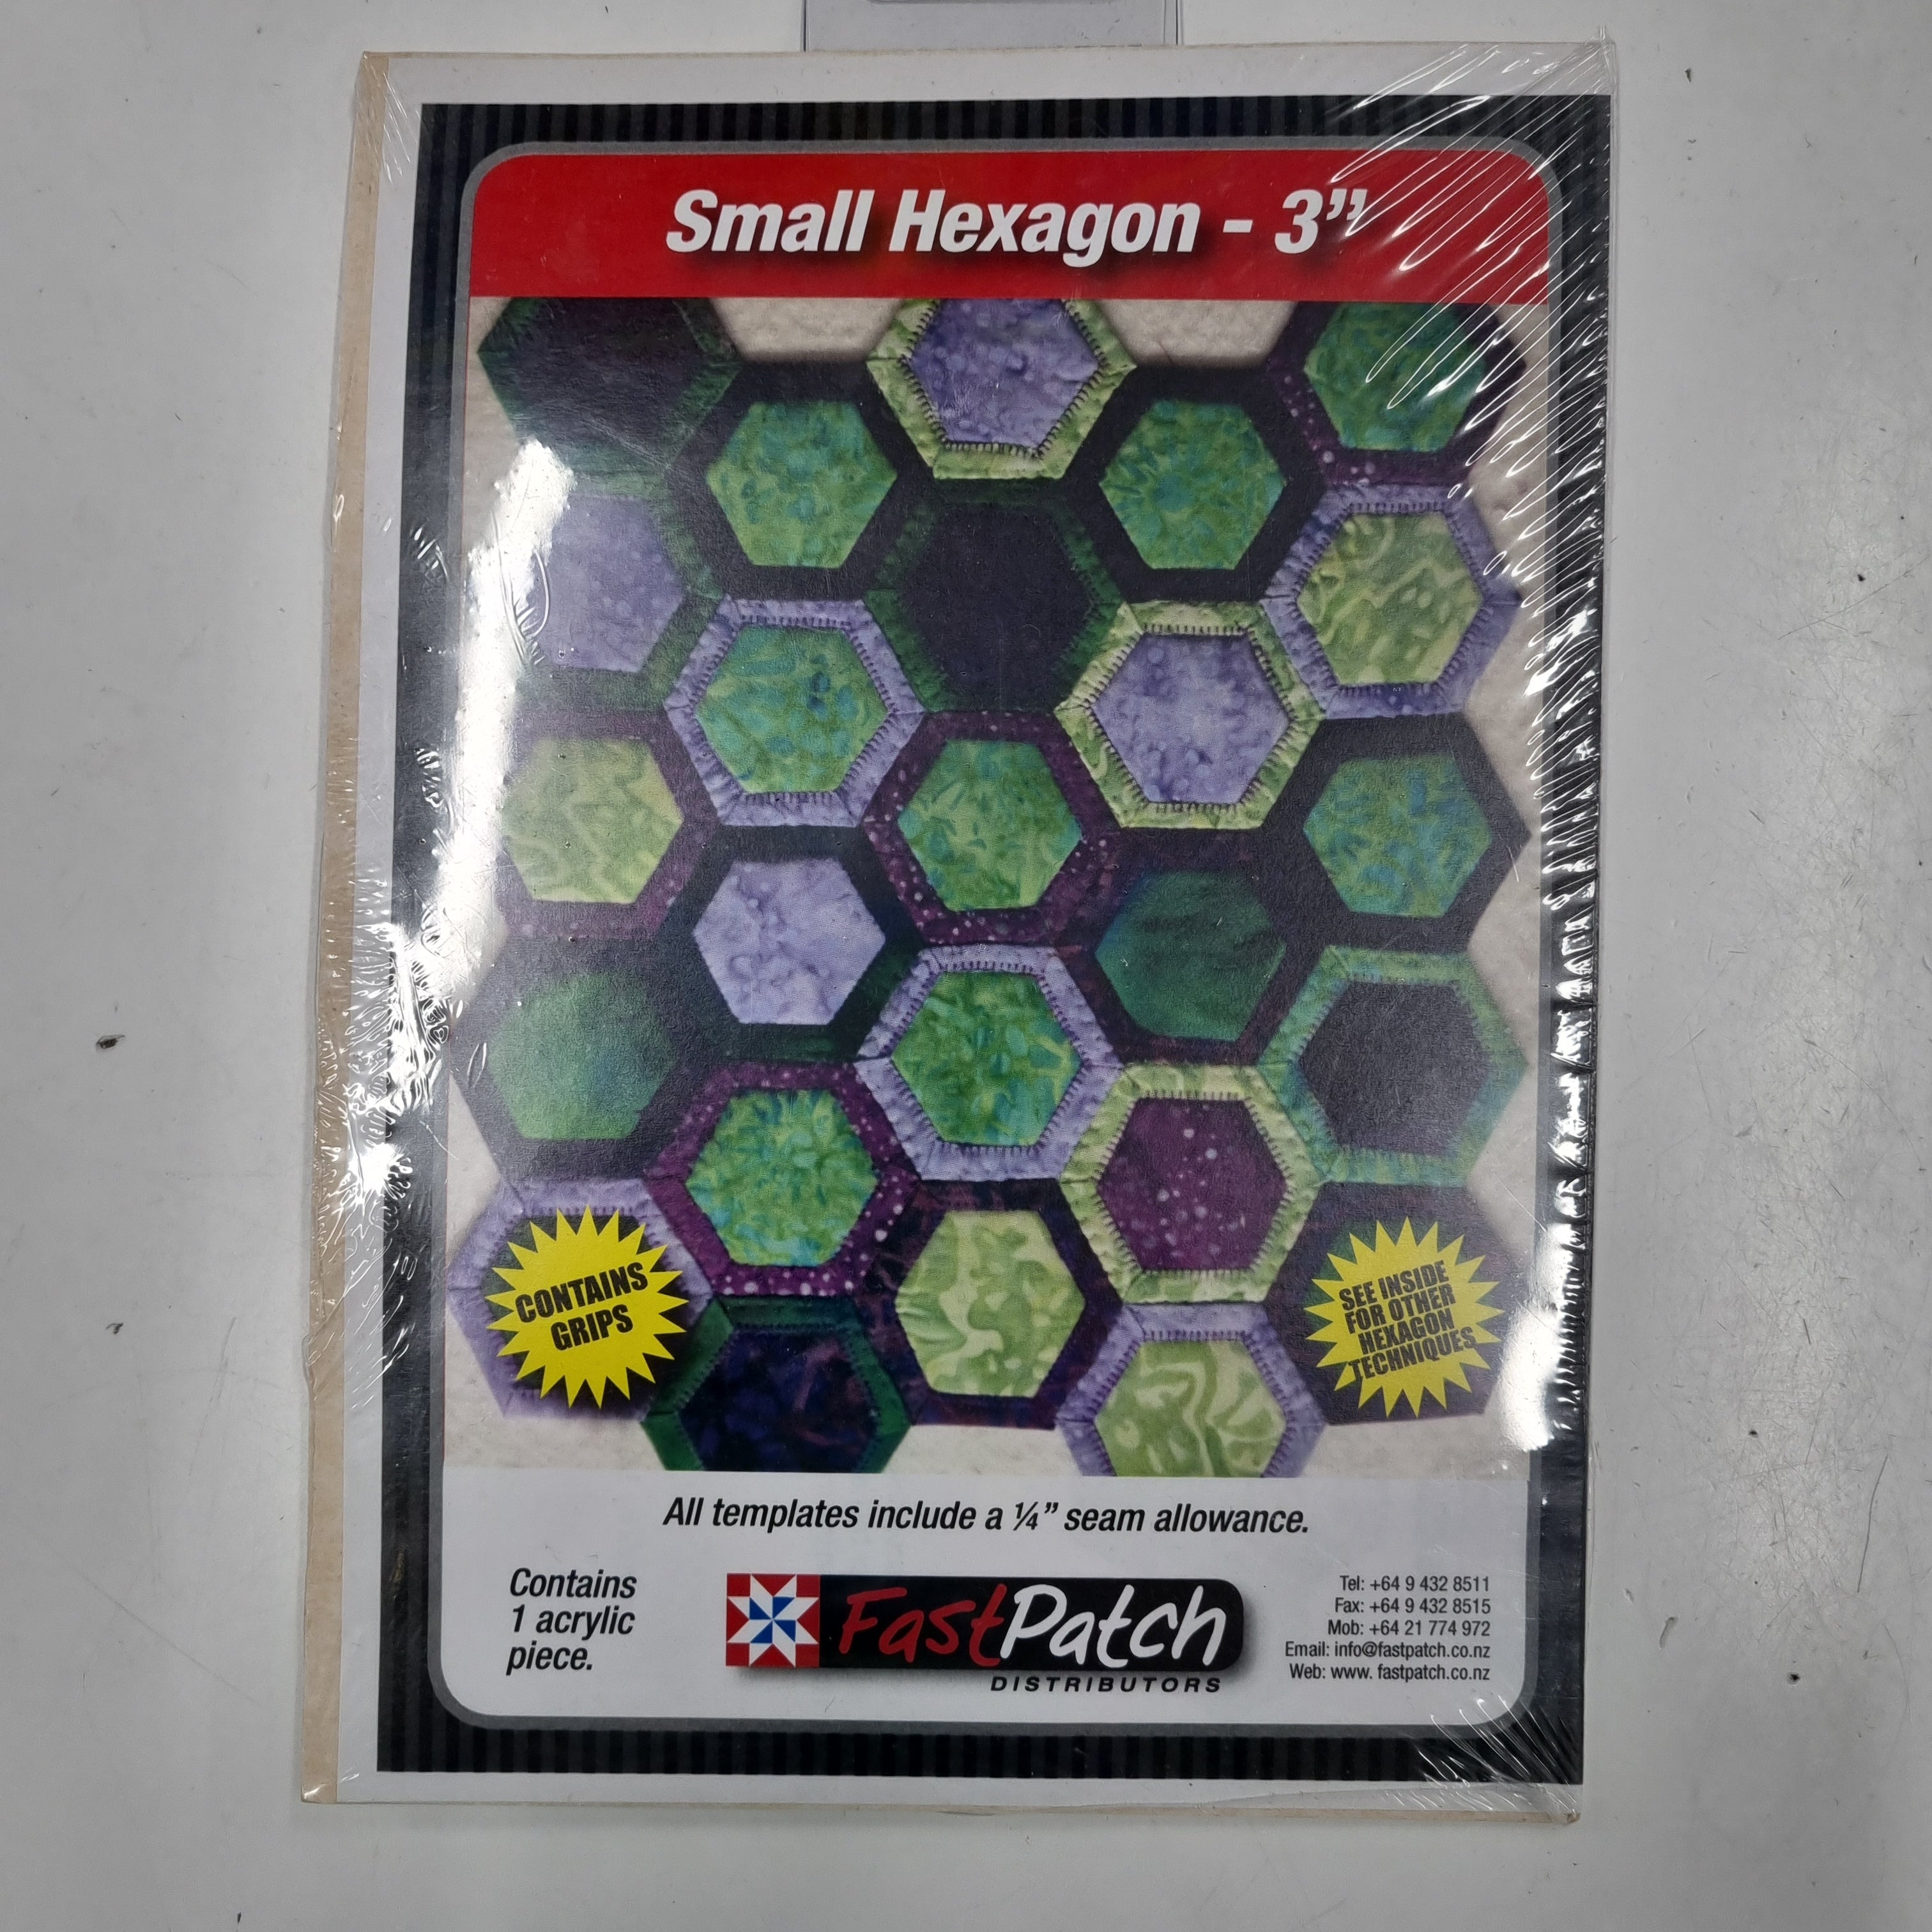 Small Hexagon - 3" Fast Patch